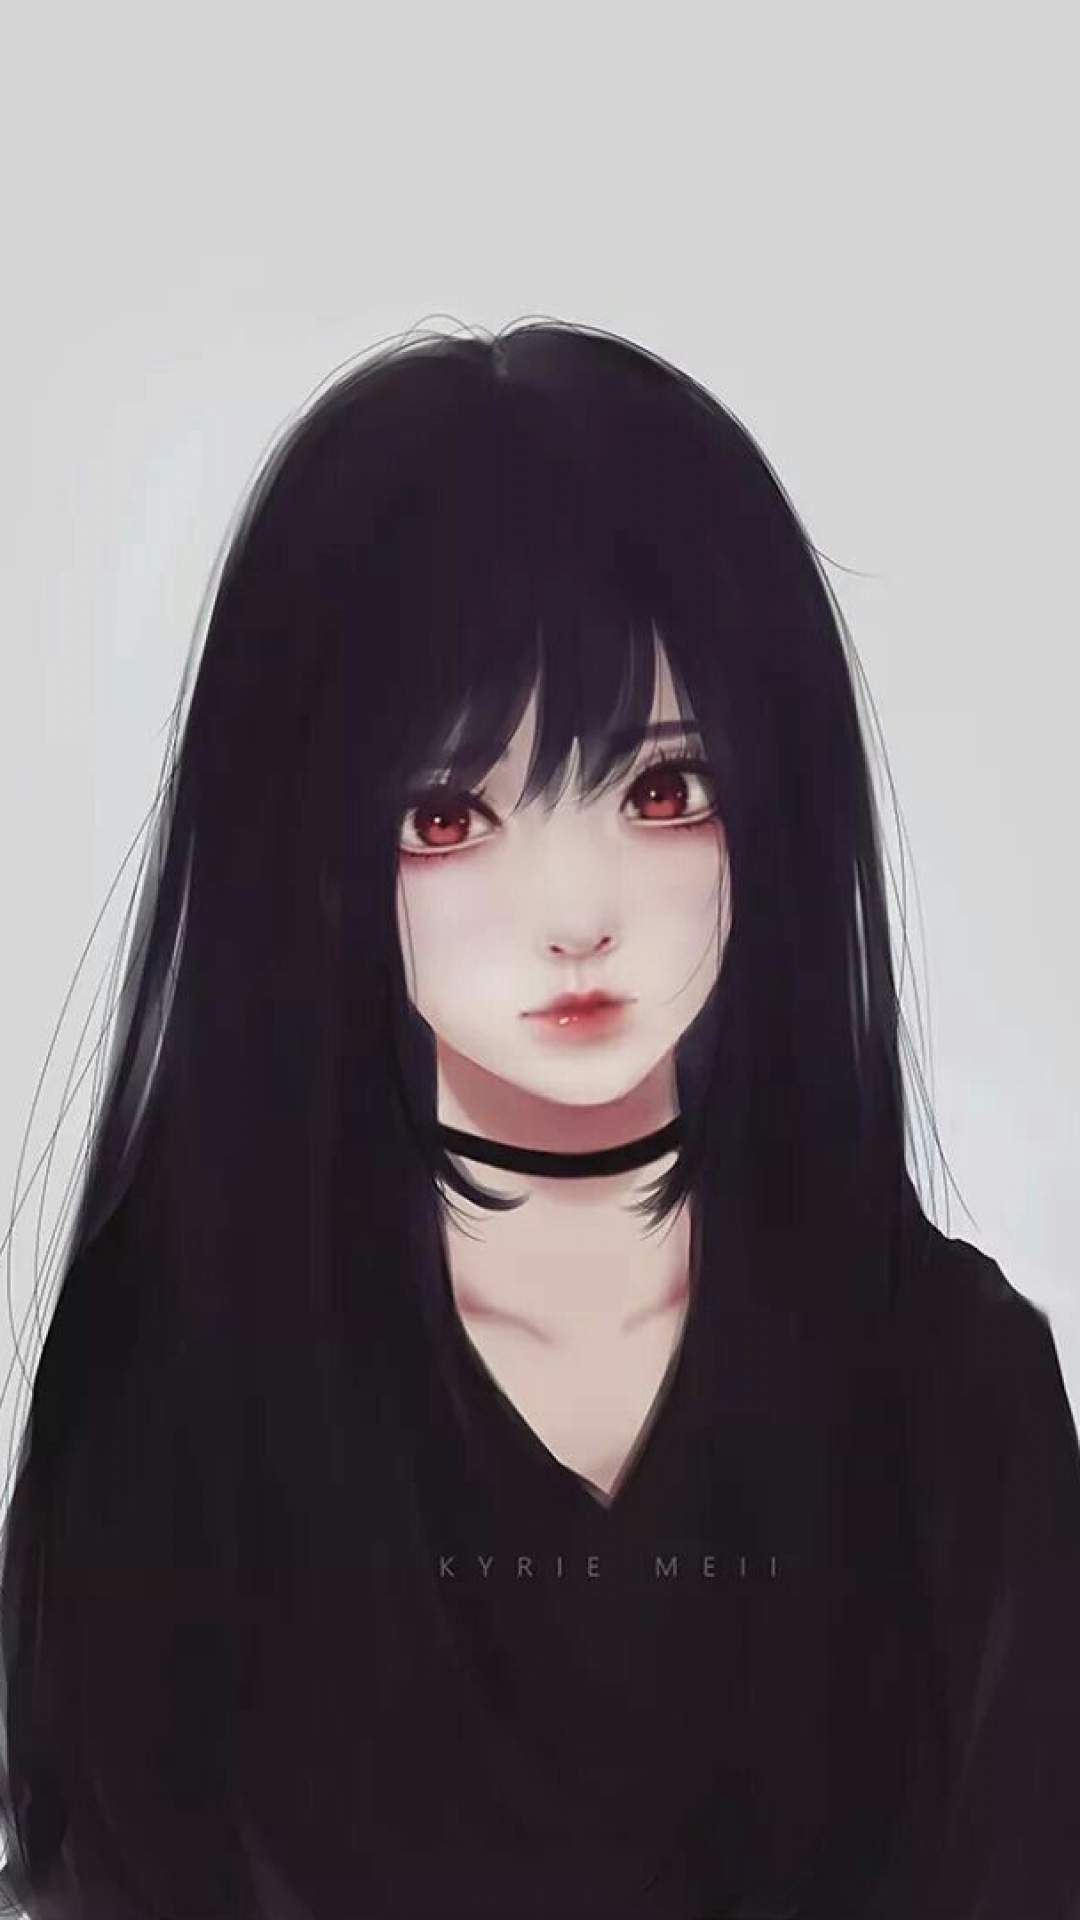 Download 1080x1920 Realistic Anime Girl, Black Hair, Red Eyes Wallpaper for iPhone iPhone 7 Plus, iPhone 6+, Sony Xperia Z, HTC One